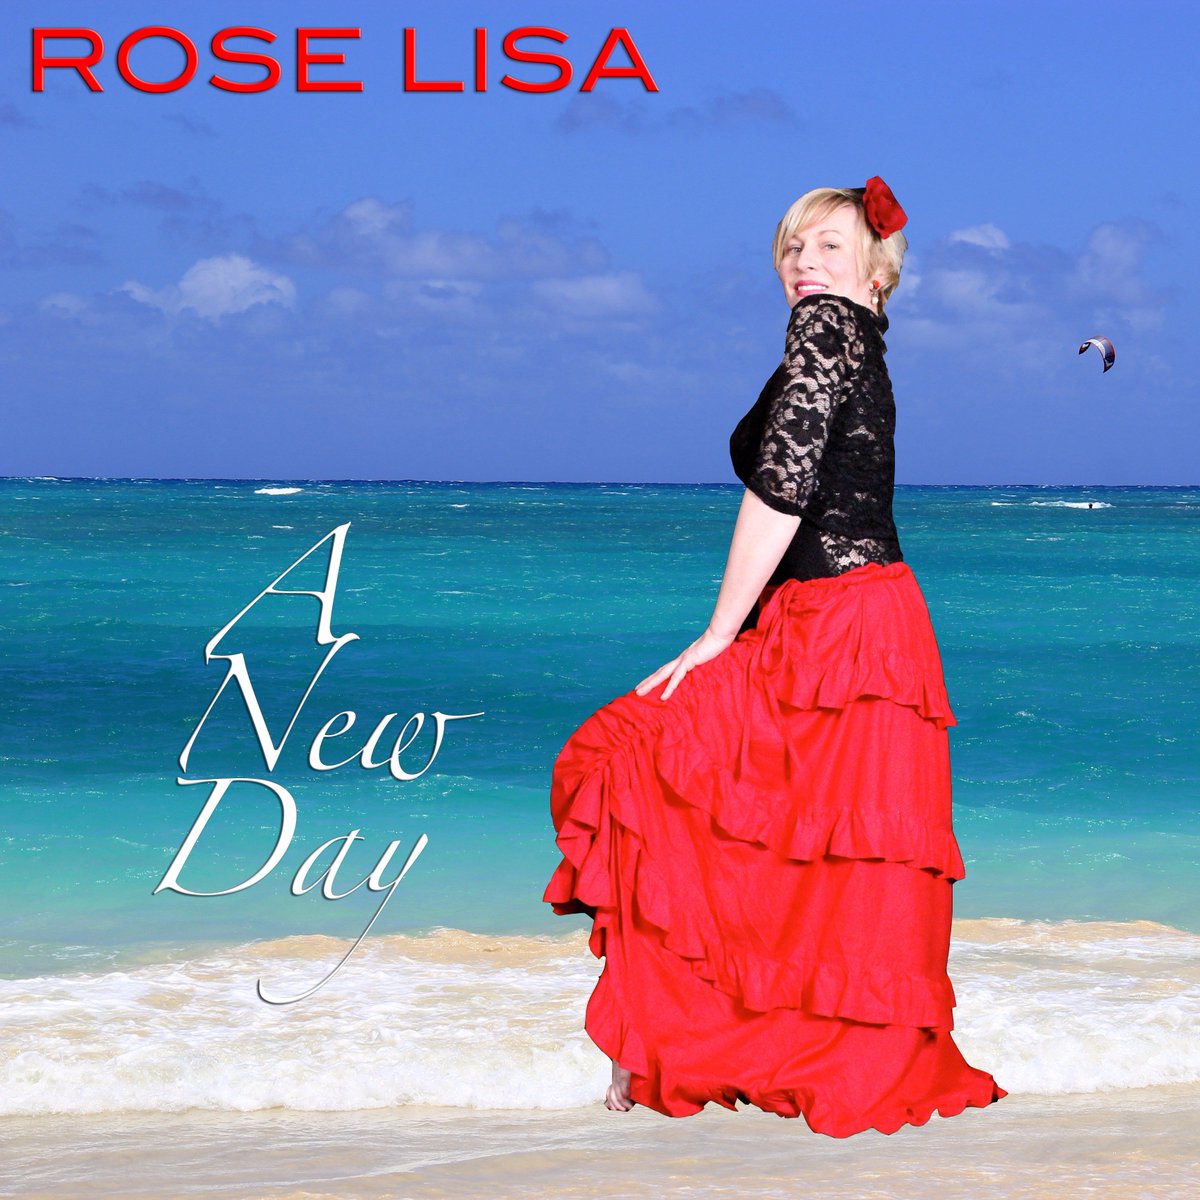 Introducing 'A New Day' by Rose Lisa (Buffalo, NY)
soundcloud.com/roselisa/a-new…
roselisa.bandcamp.com/track/a-new-day
#Pop #SynthPop #SoloFemaleArtist